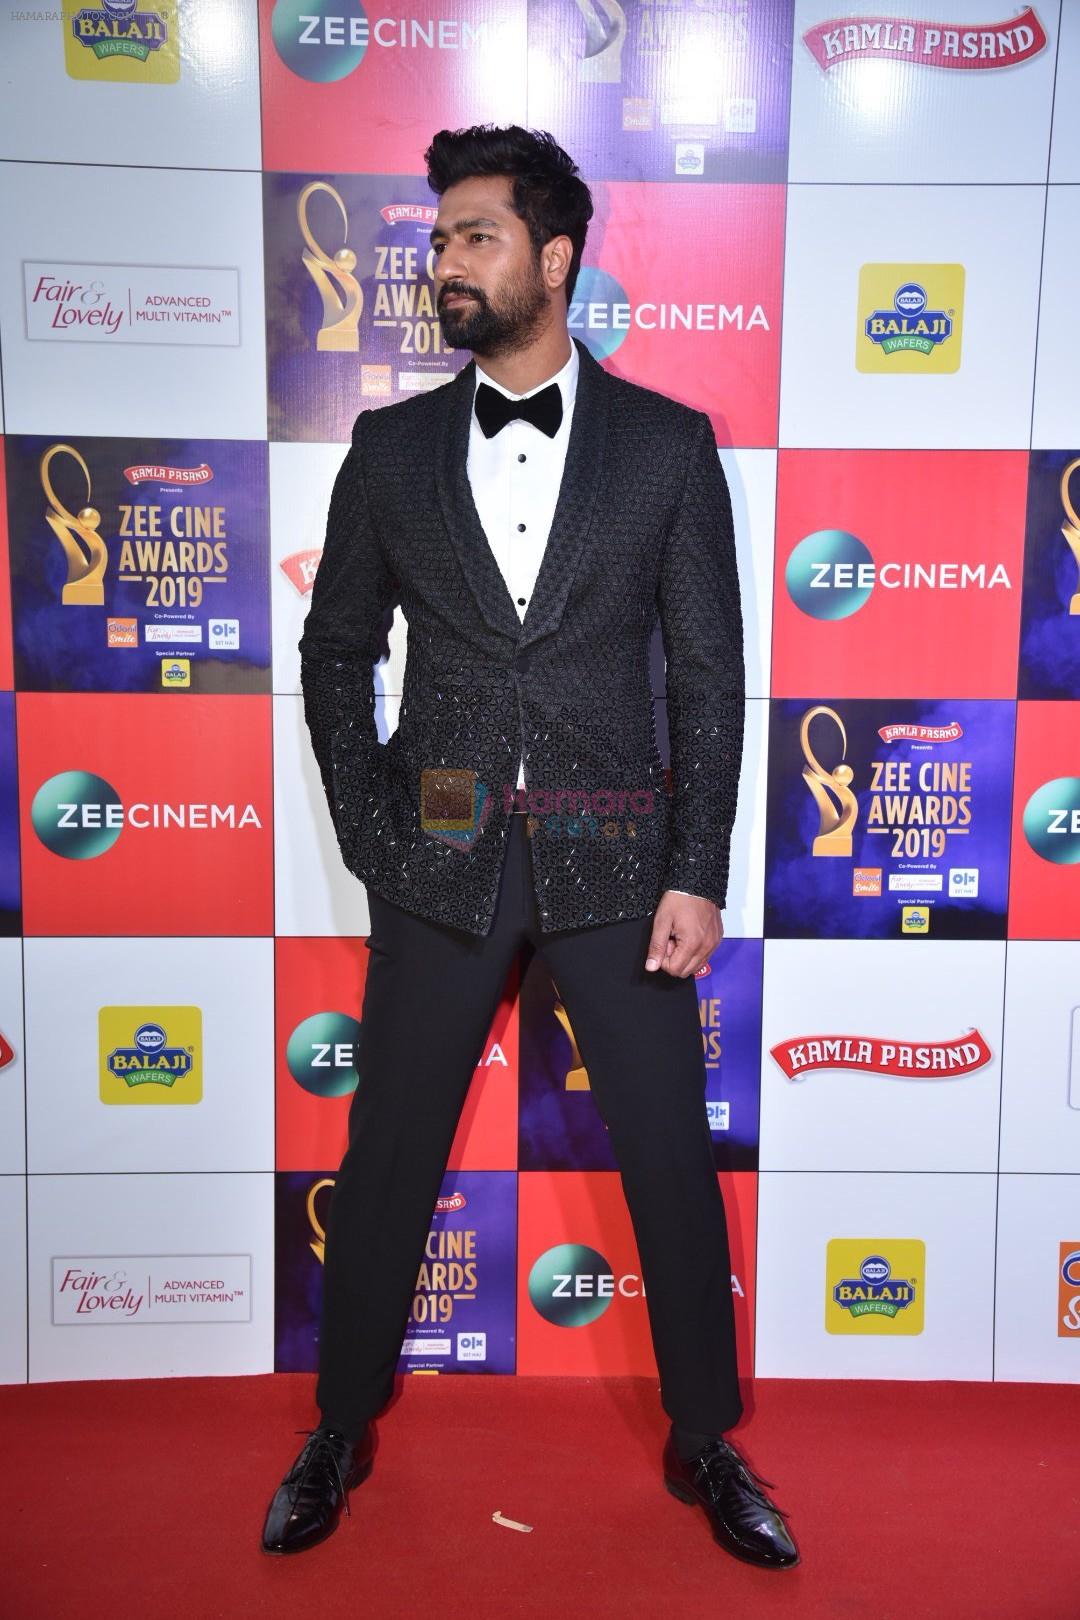 Vicky Kaushal at Zee cine awards red carpet on 19th March 2019